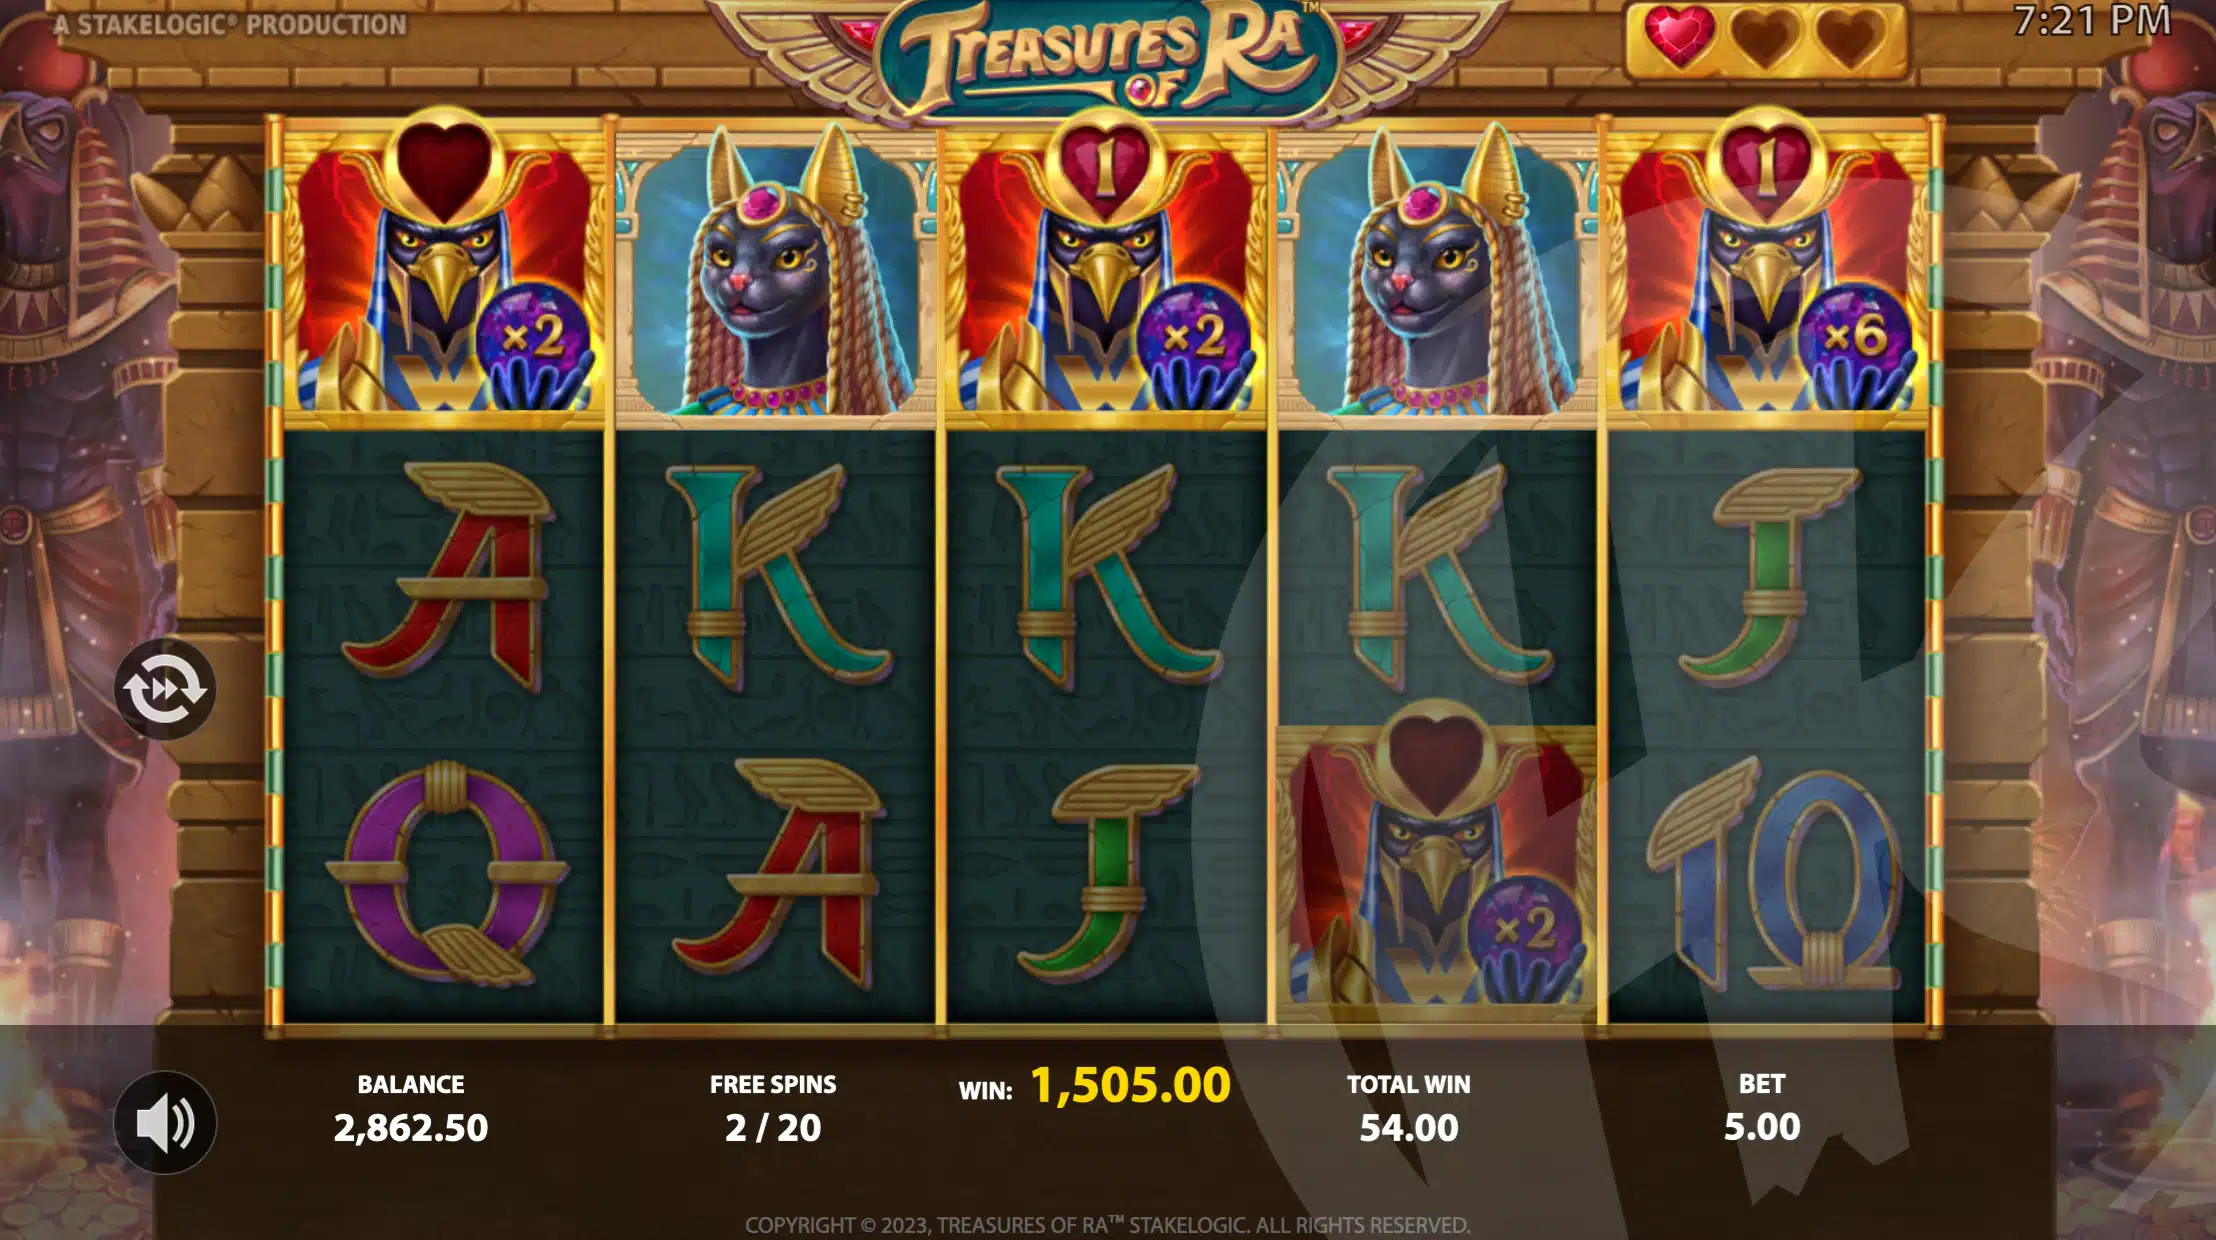 Countdown Wilds Can Occur During Free Spins